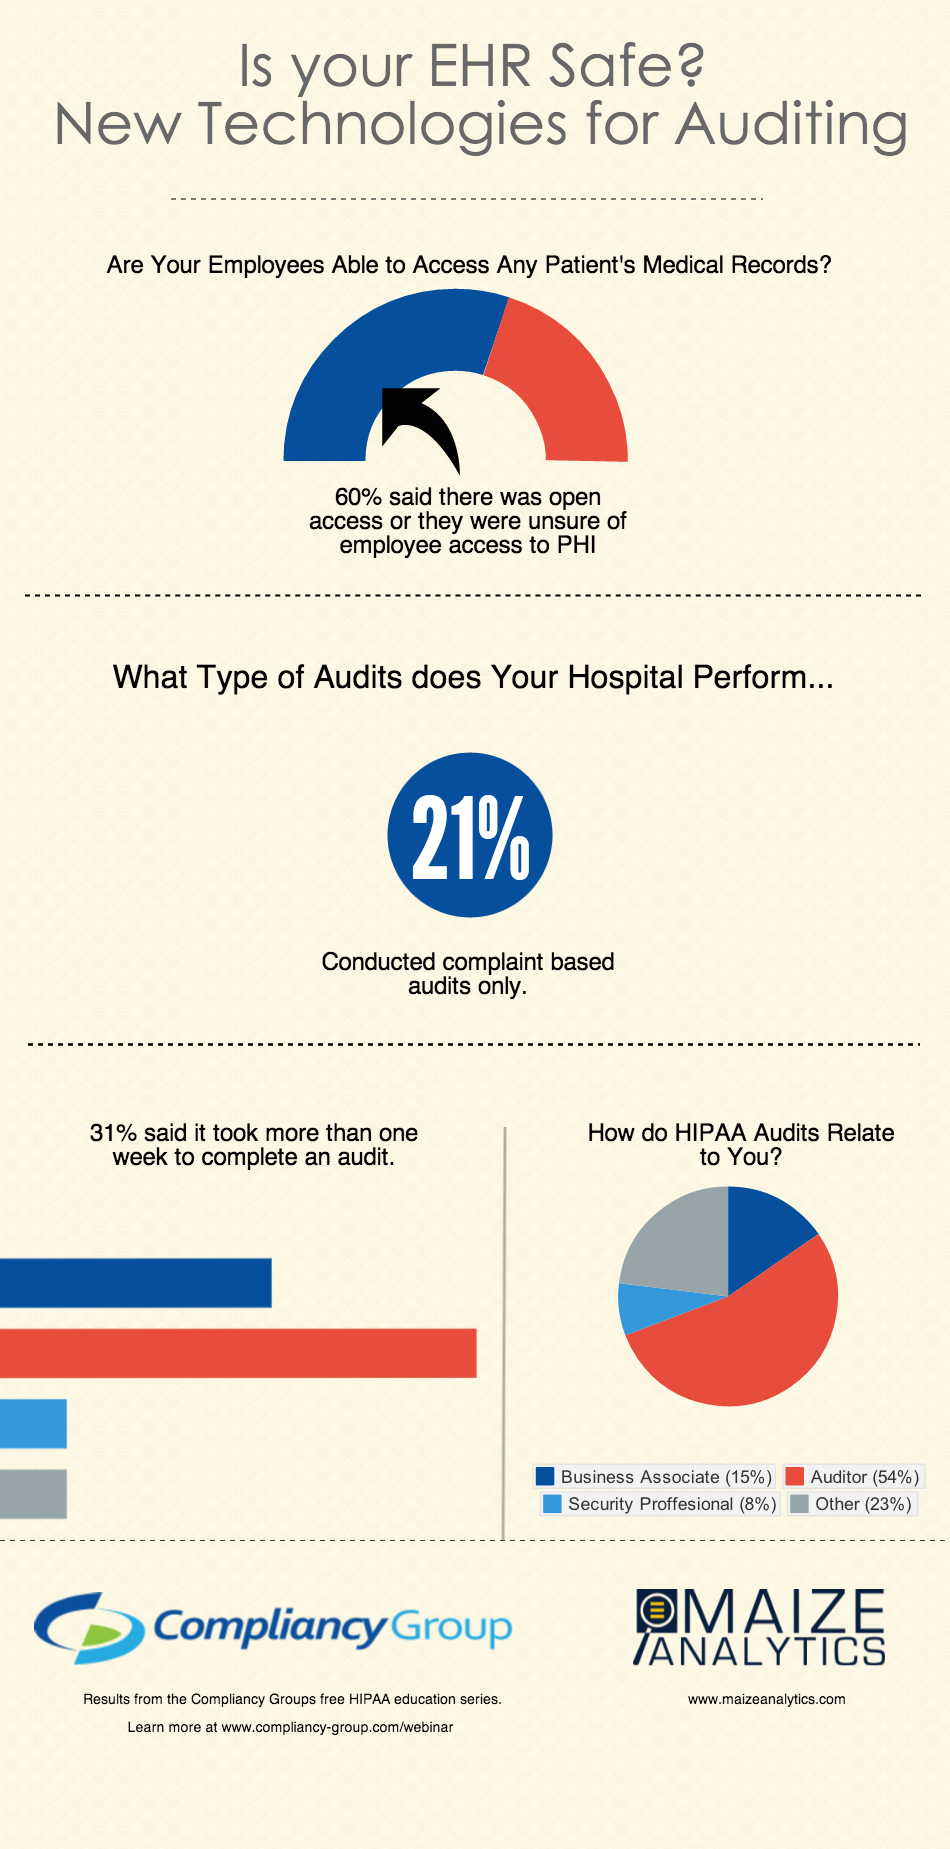 Is Your EHR Safe? HIPAA infographic